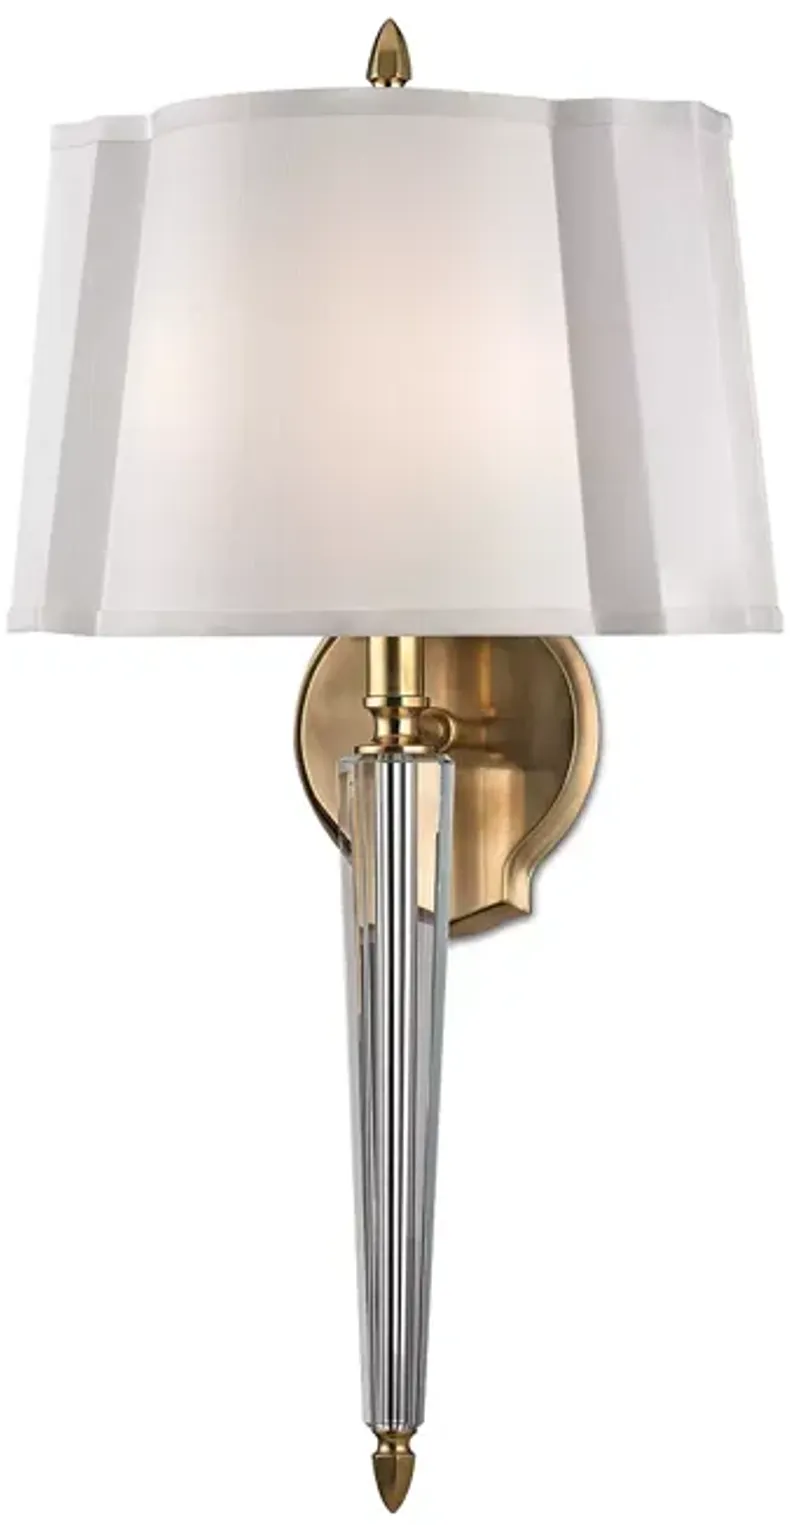 Hudson Valley Lighting Oyster Bay Wall Sconce